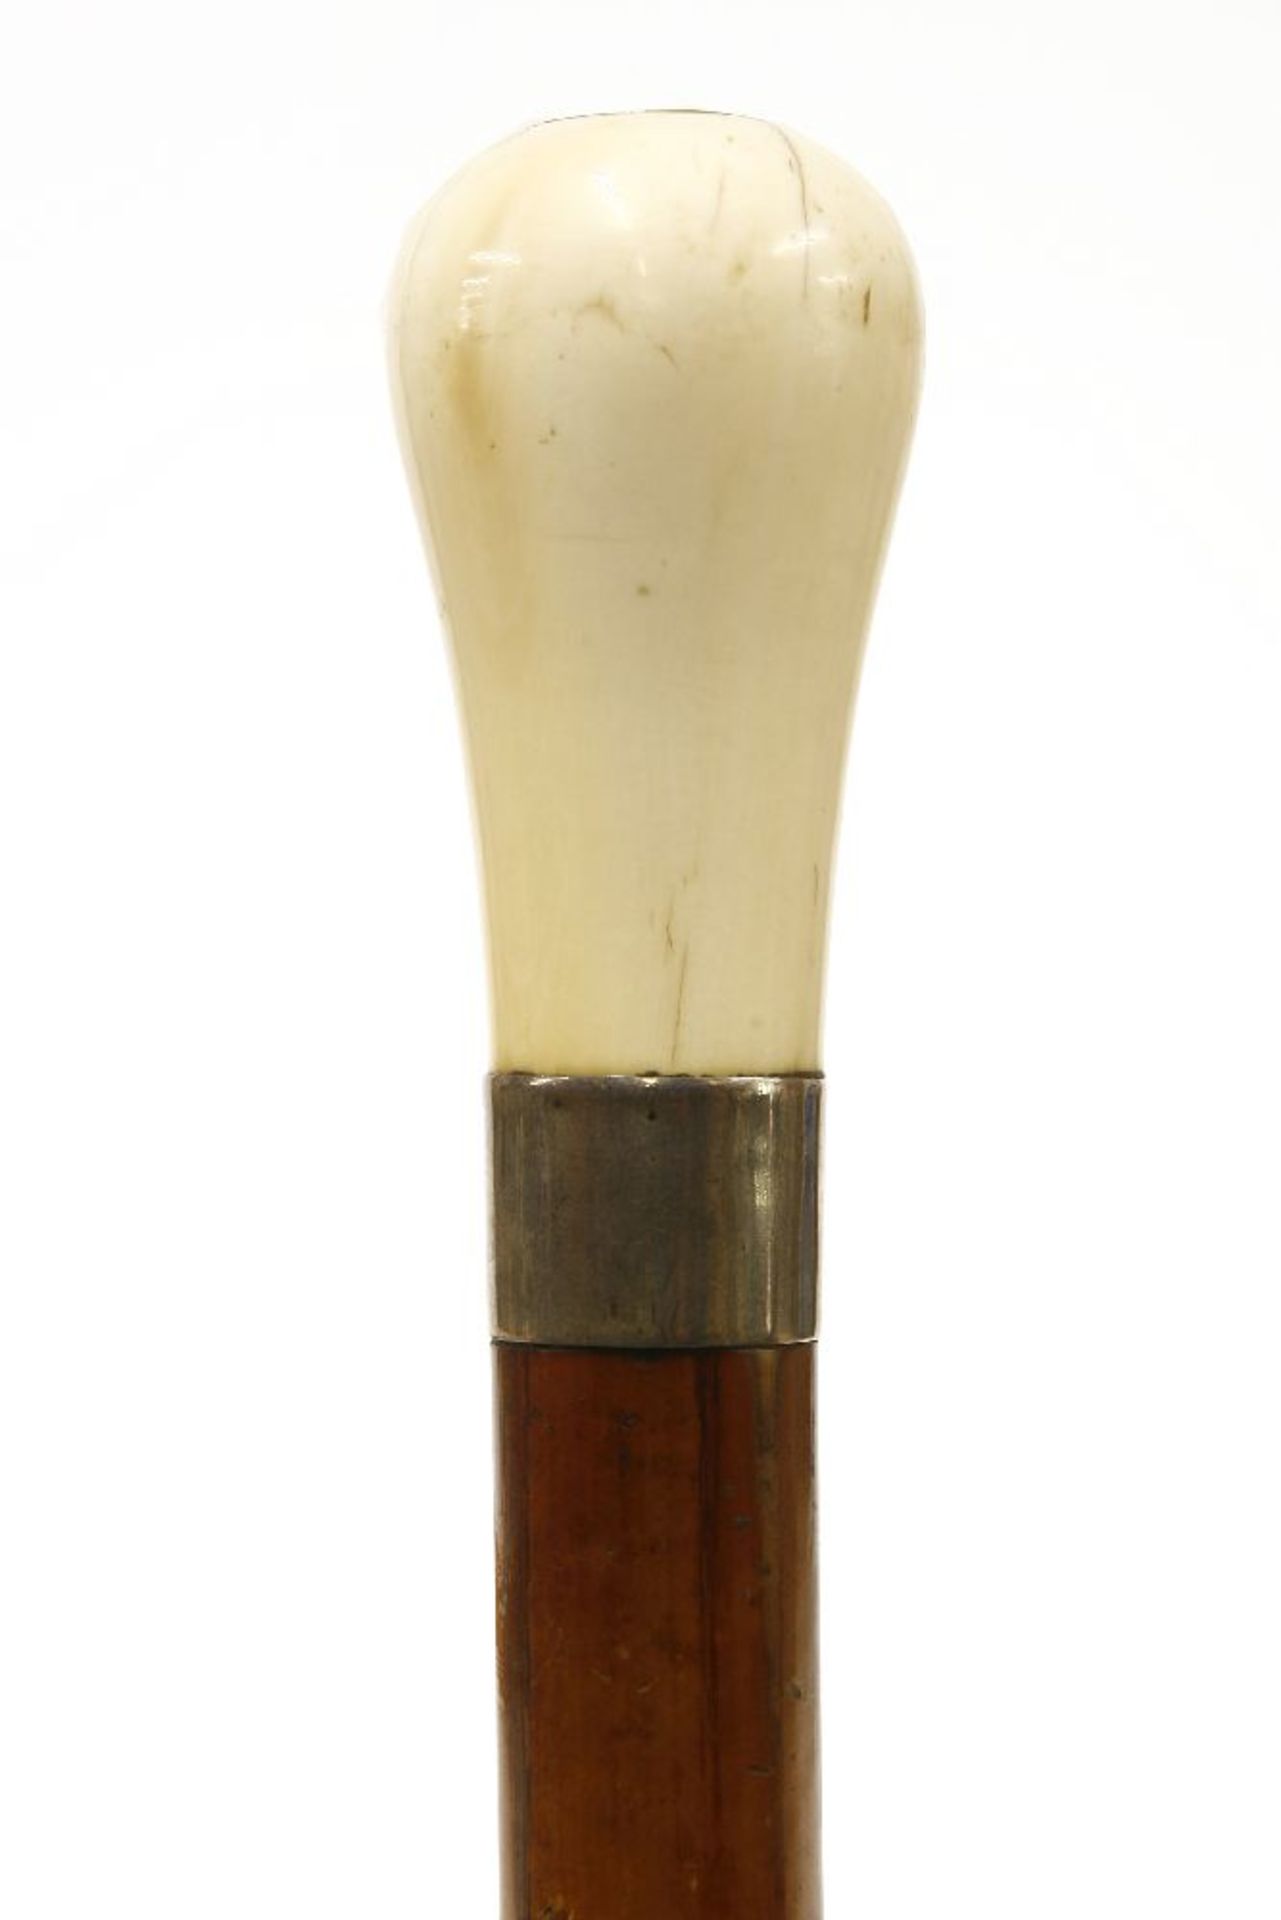 A malacca stout walking stick,19th century, concealing a flick blade within the handle,90cm long